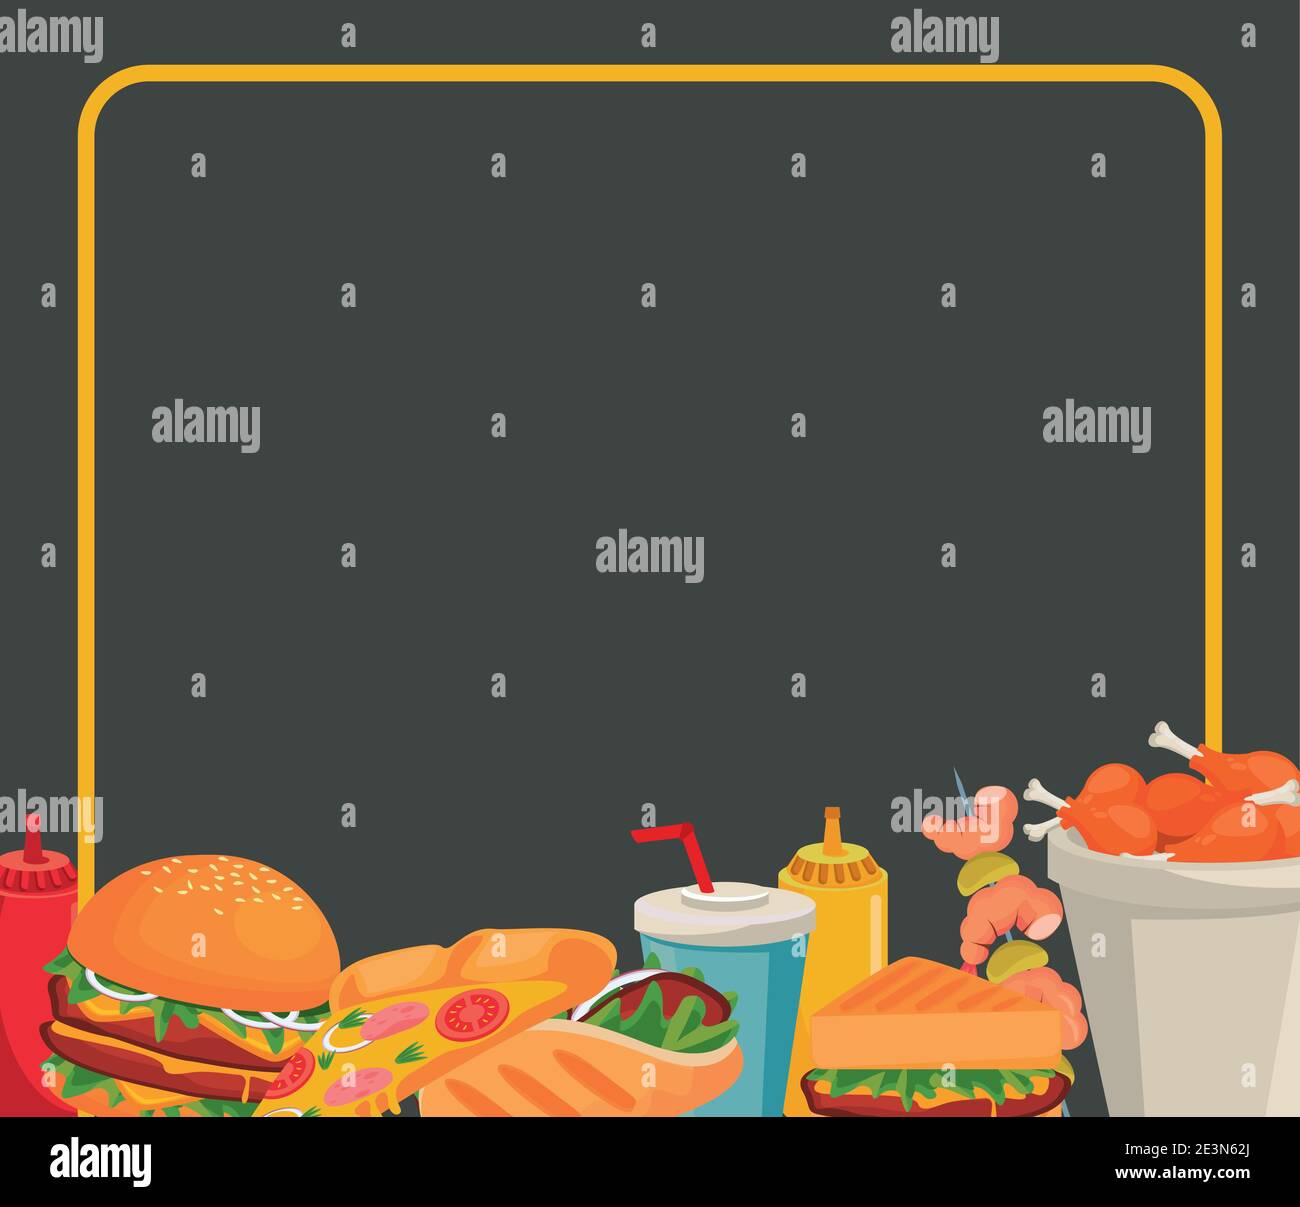 square frame with delicious fast food menu template vector illustration design Stock Vector